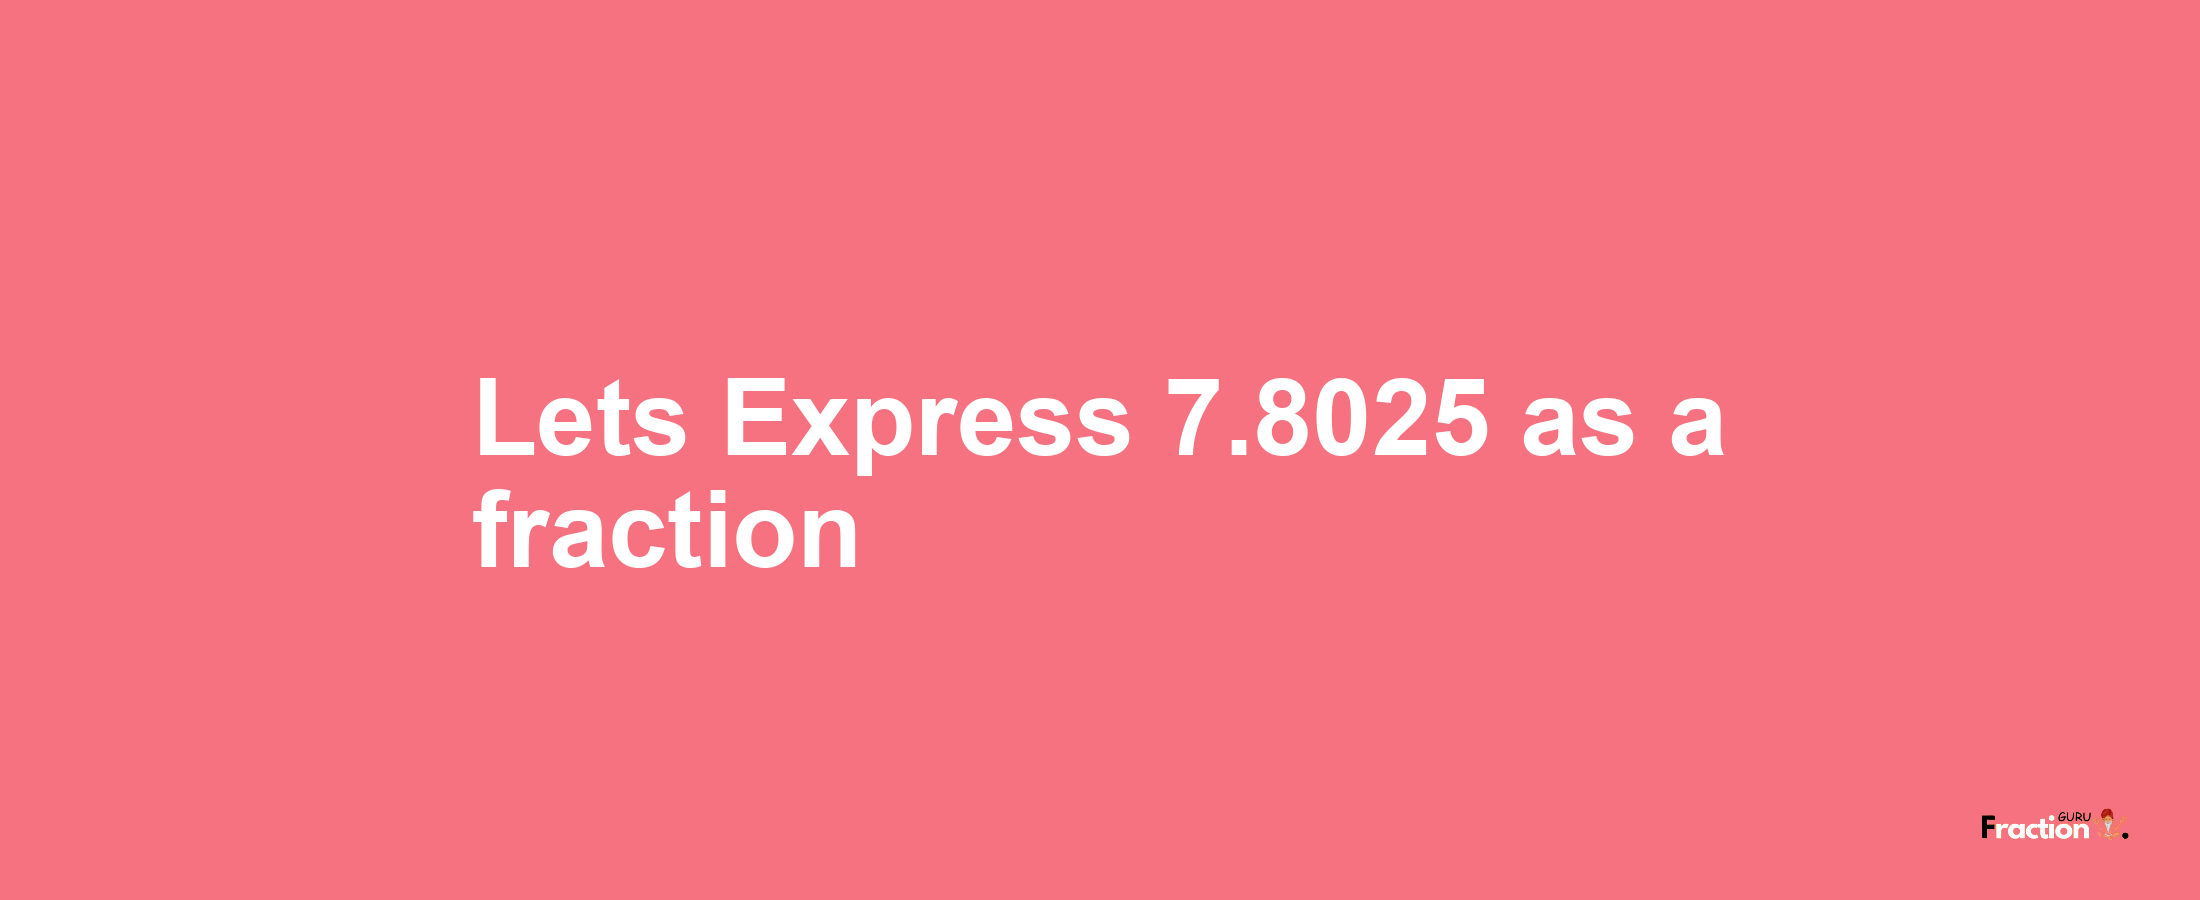 Lets Express 7.8025 as afraction